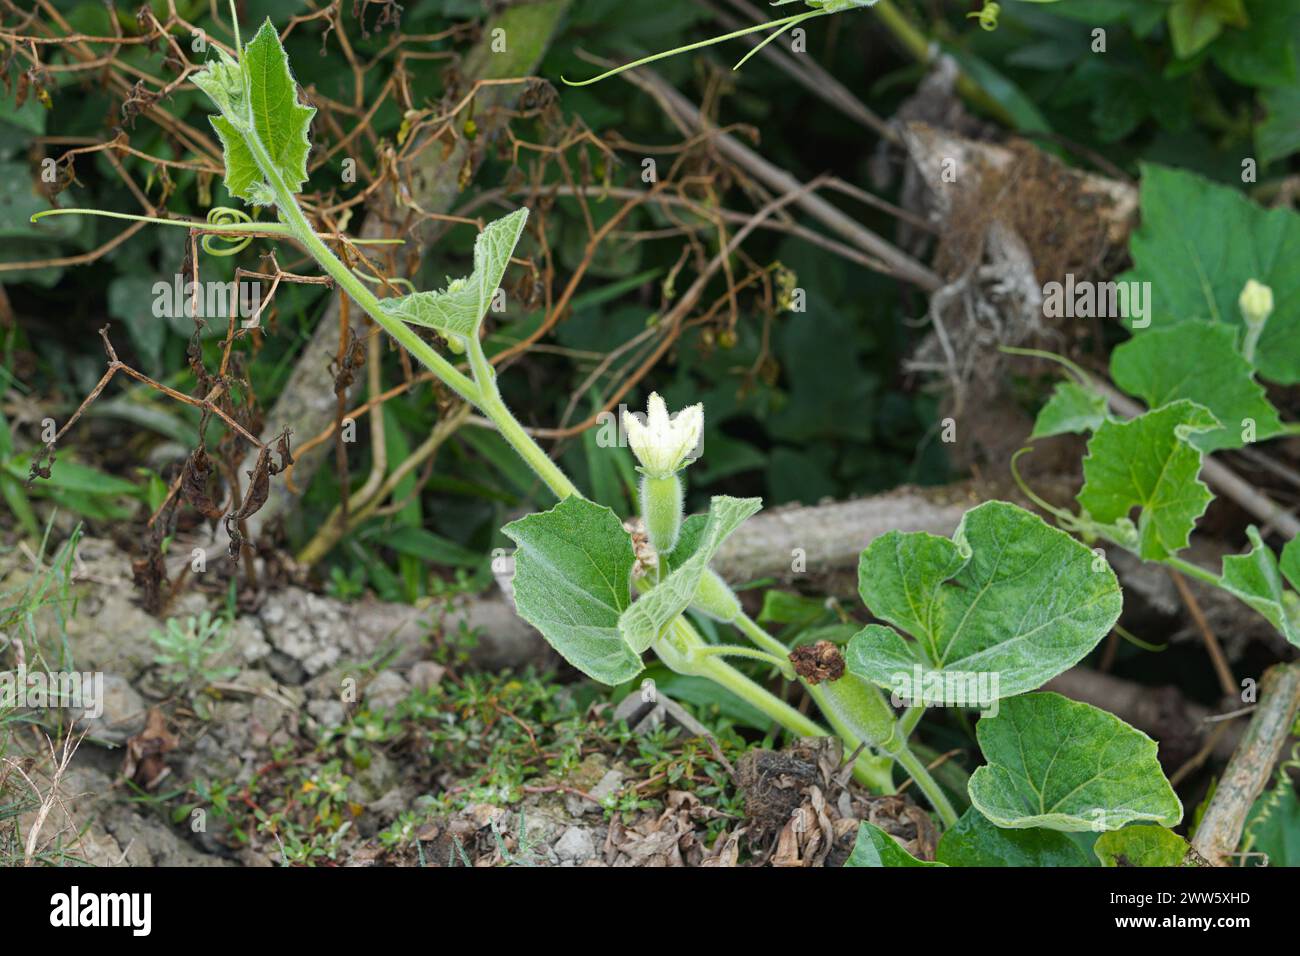 Calabash tree with small calabashes and flowers, Bottle gourd growing up on it's tree Stock Photo